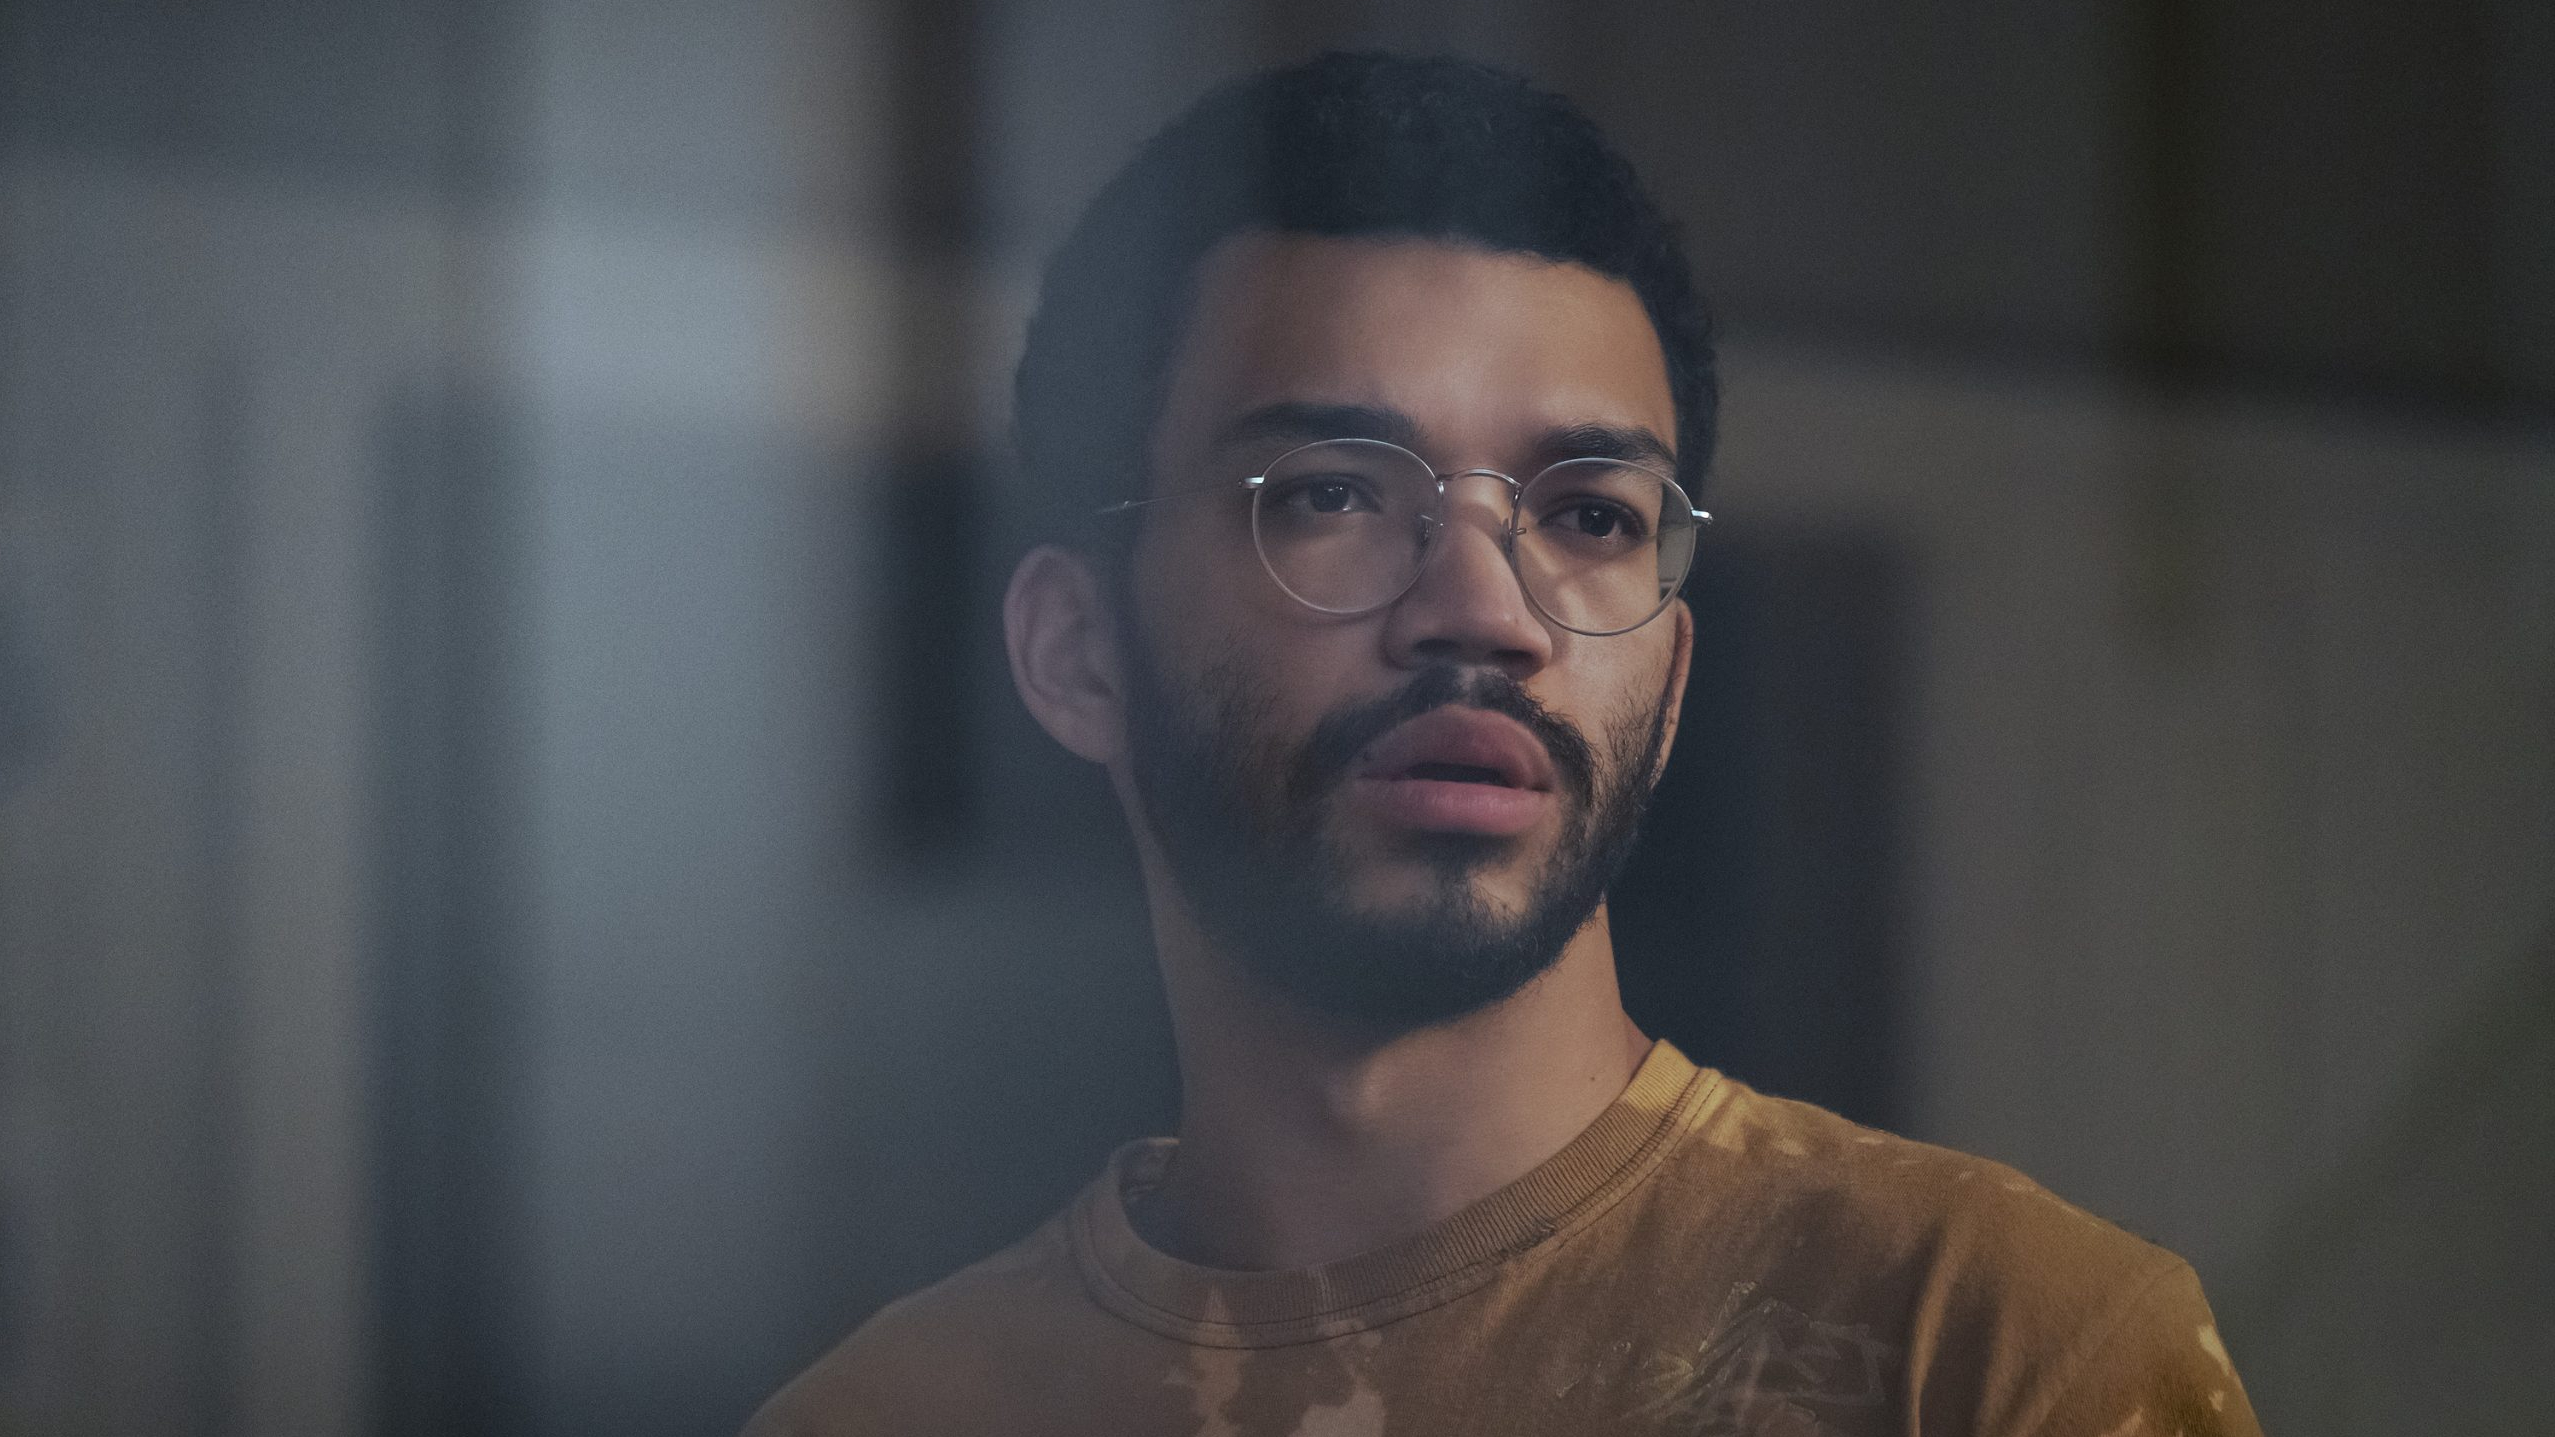 Justice Smith on The Voyeurs and Filming in During the Pandemic pic